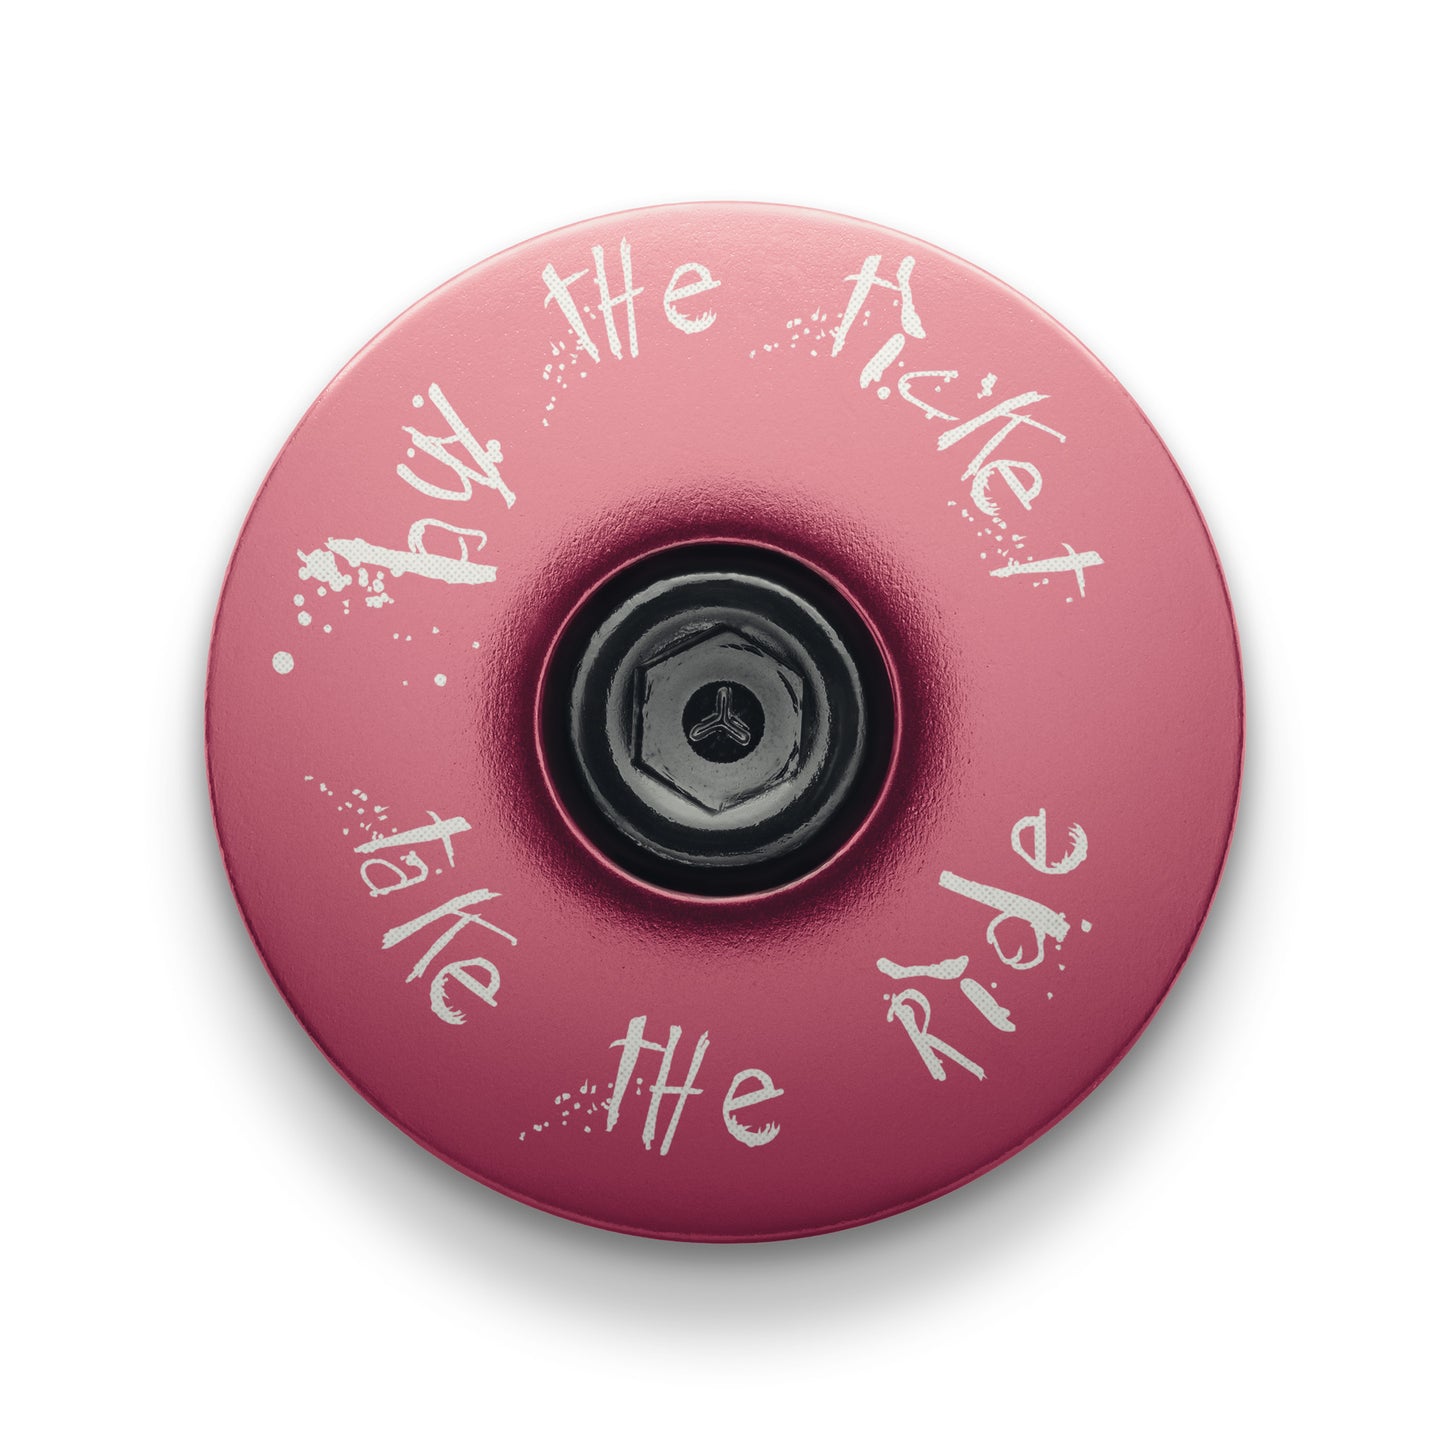 Buy The Ticket Take The Ride Bicycle Headset Cap